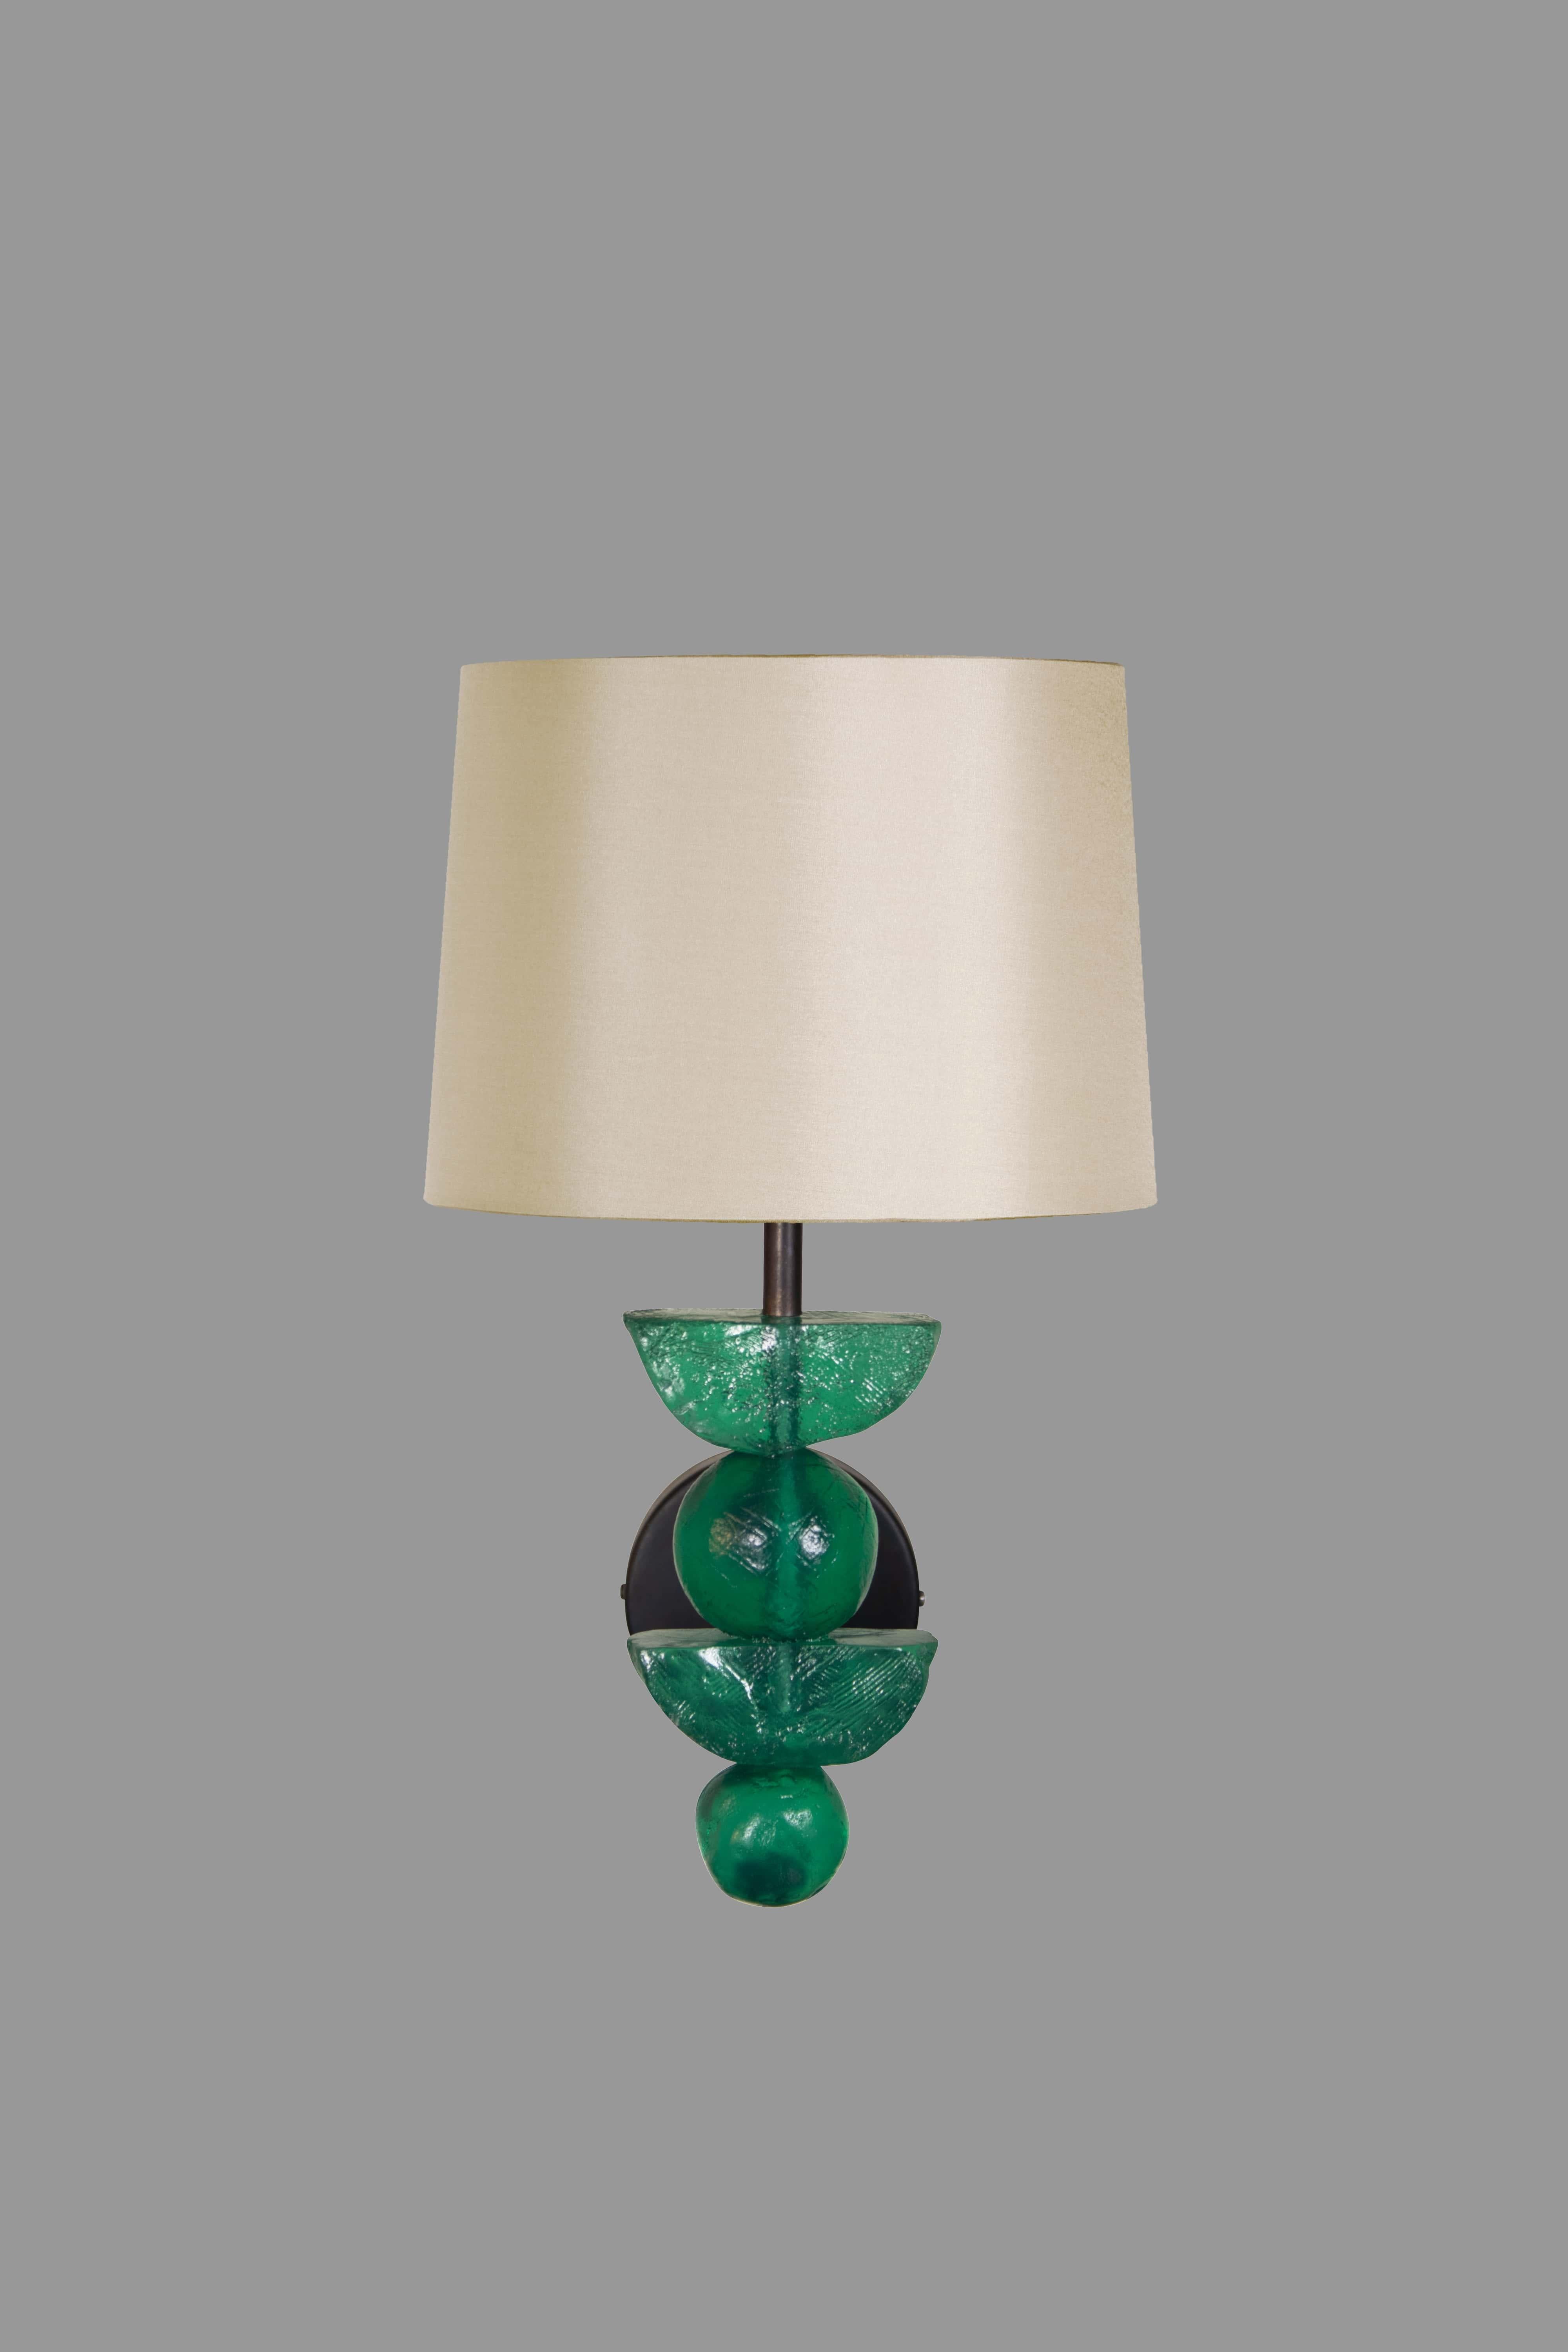 English Silhouette Wall Light in Emerald and Blackened Metal Finish by Margit Wittig For Sale